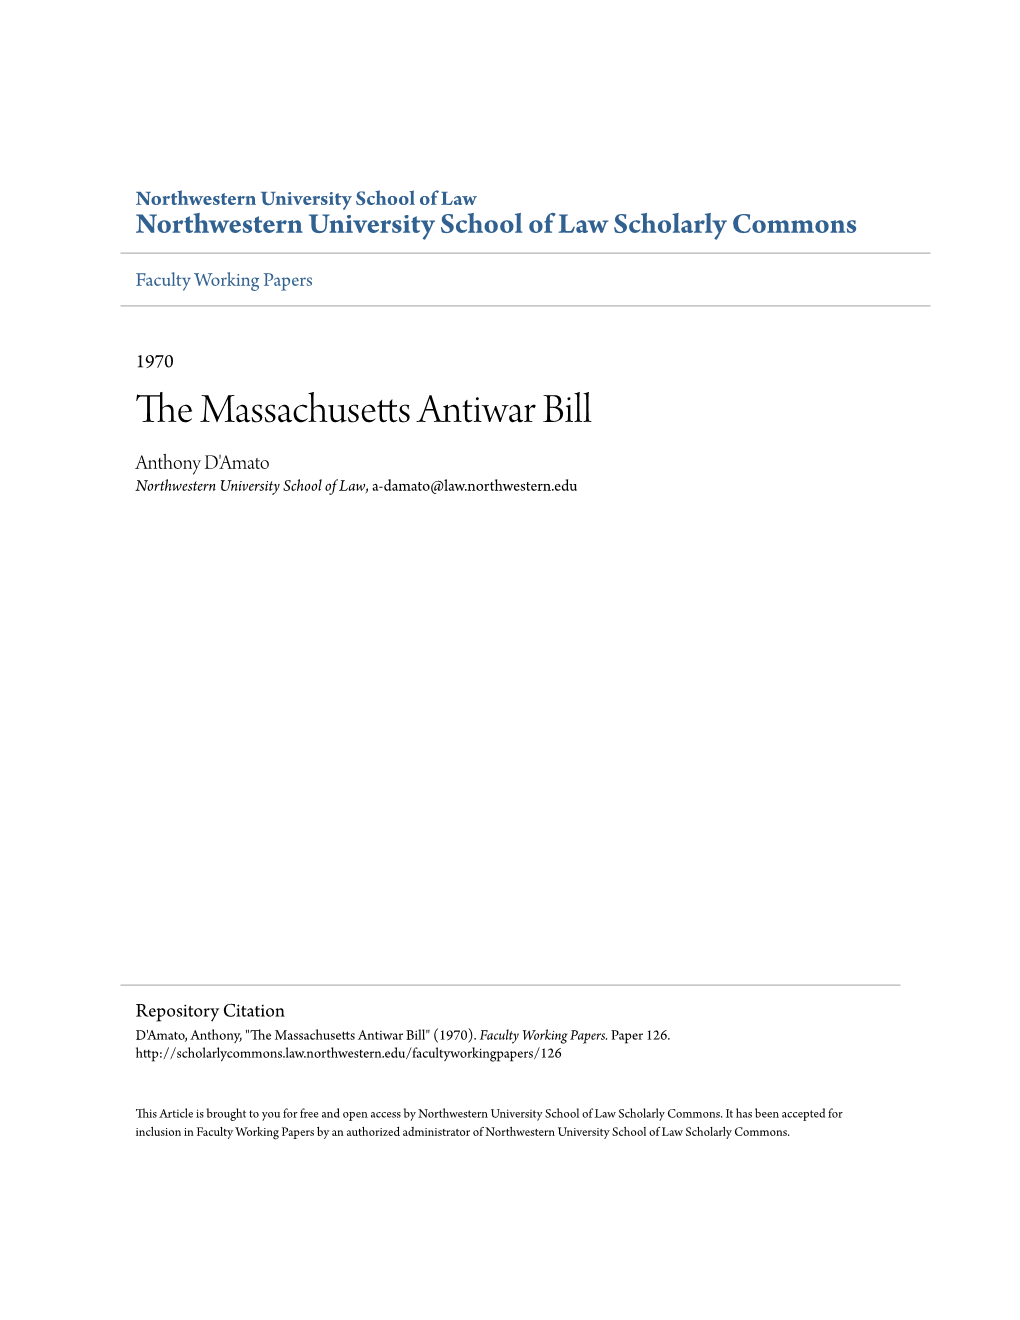 The Massachusetts Antiwar Bill, by Anthony A